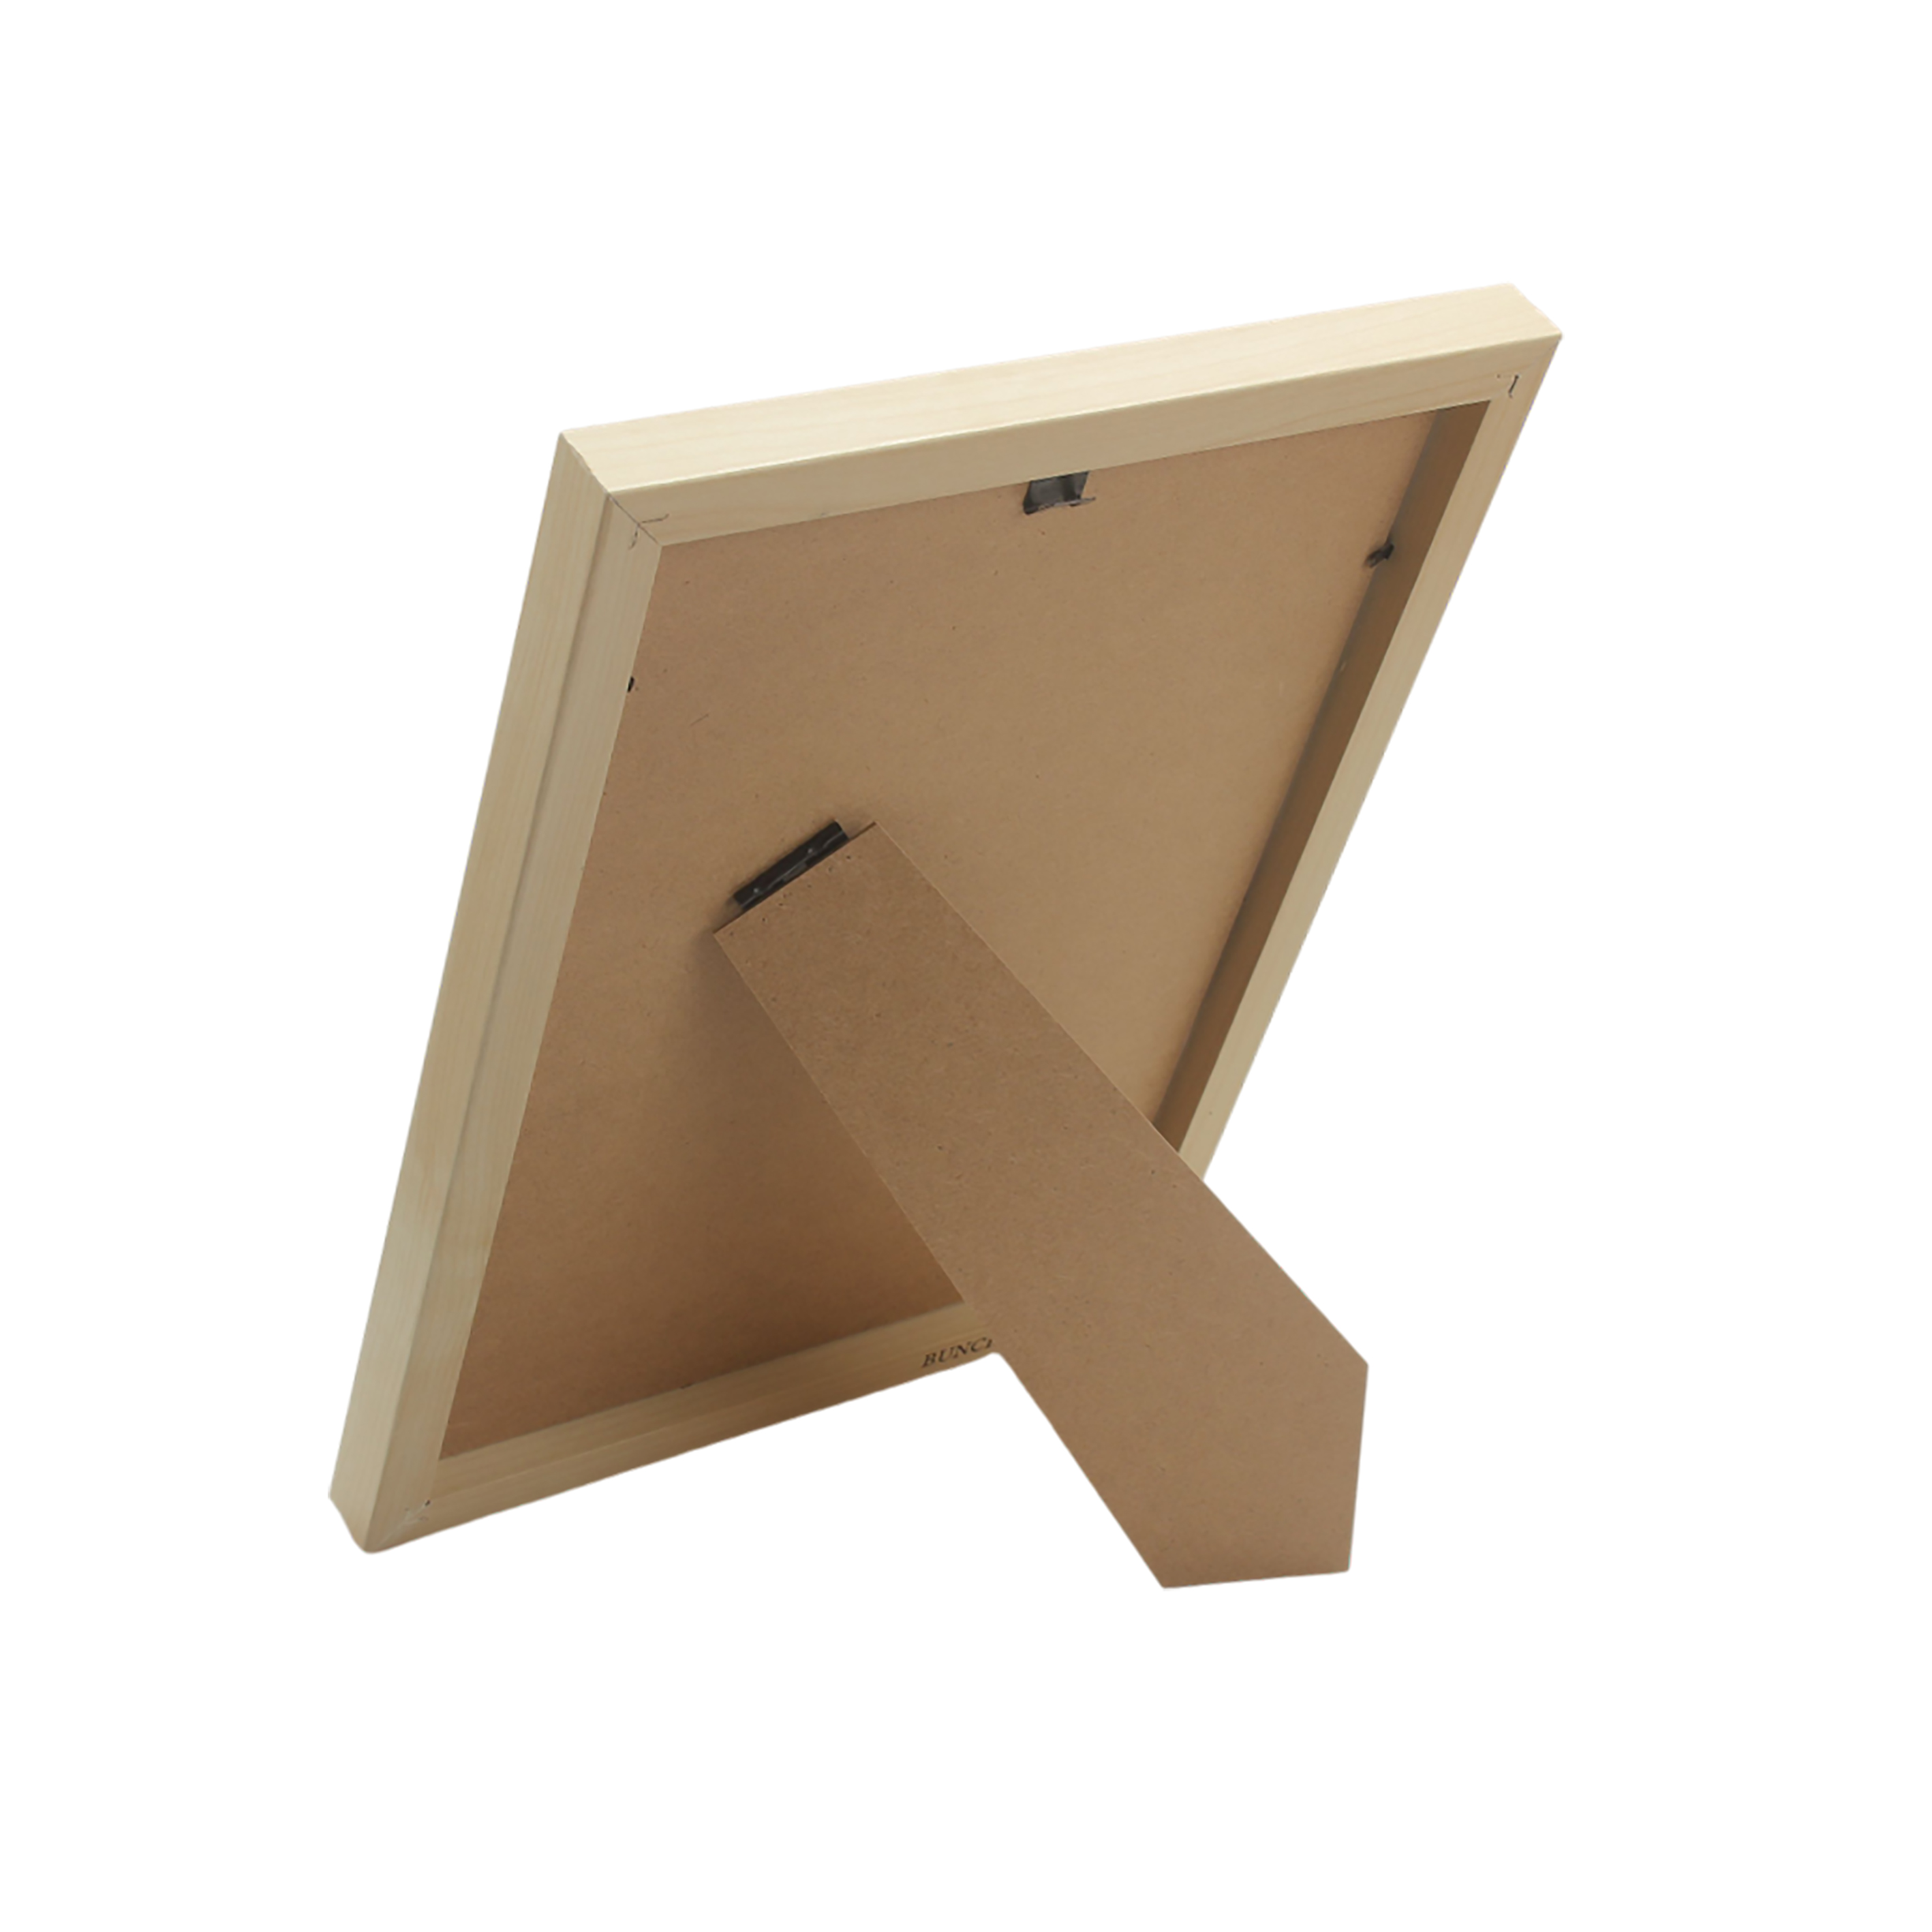 BUNCHBRAVO Photo frame A4 paper size rectangular wooden frame can be used as a decoration and hung on walls(2 Pack)